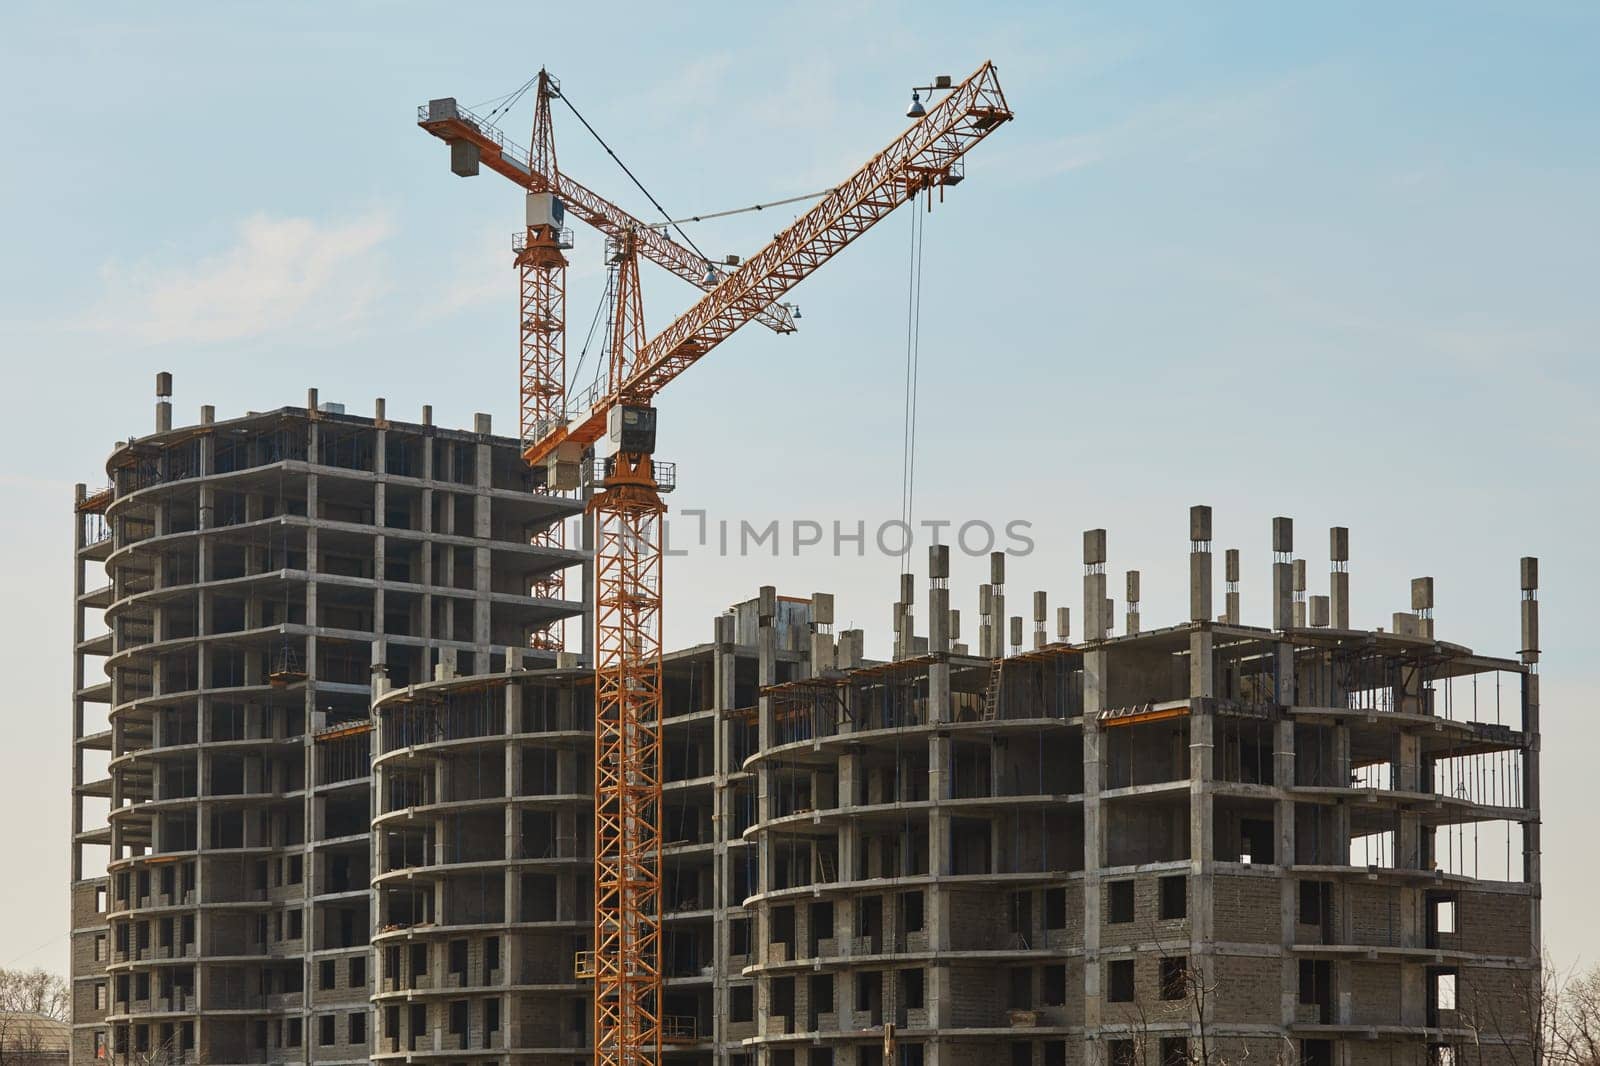 Building construction site with cranes under clear sky